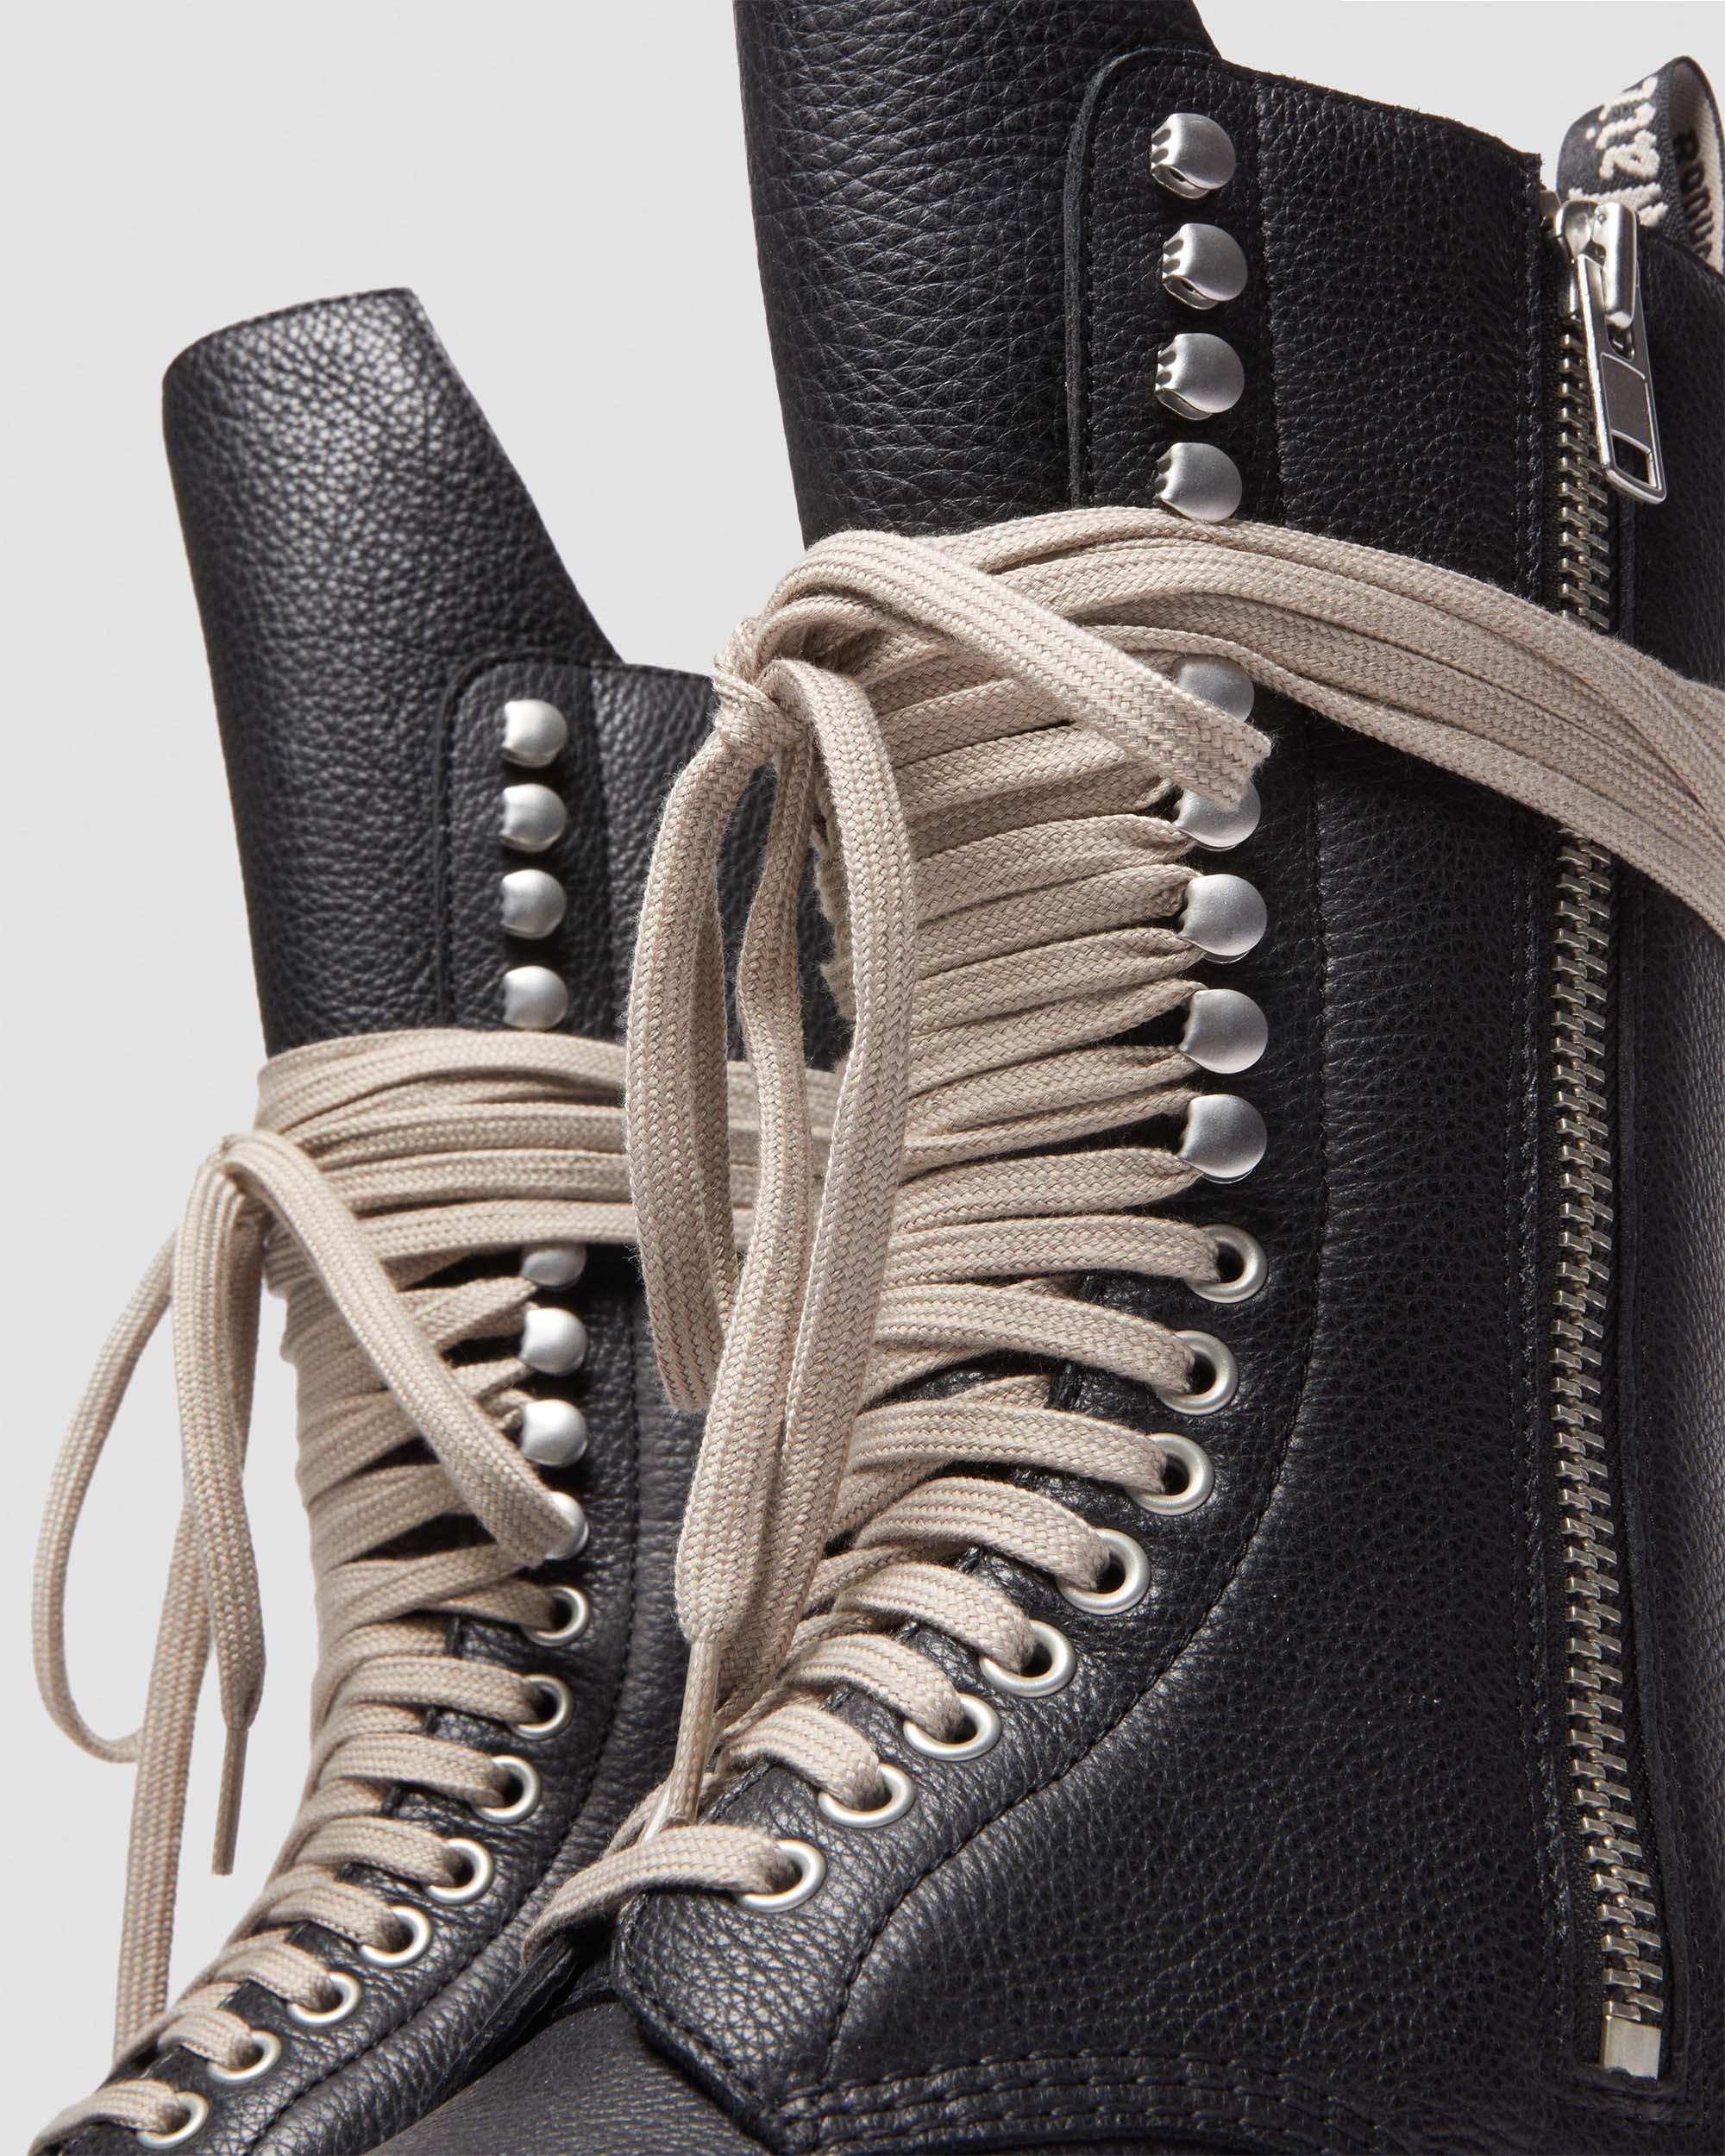 DR MARTENS 1918 Rick Owens DMXL Tall Leather Lace Up Boots